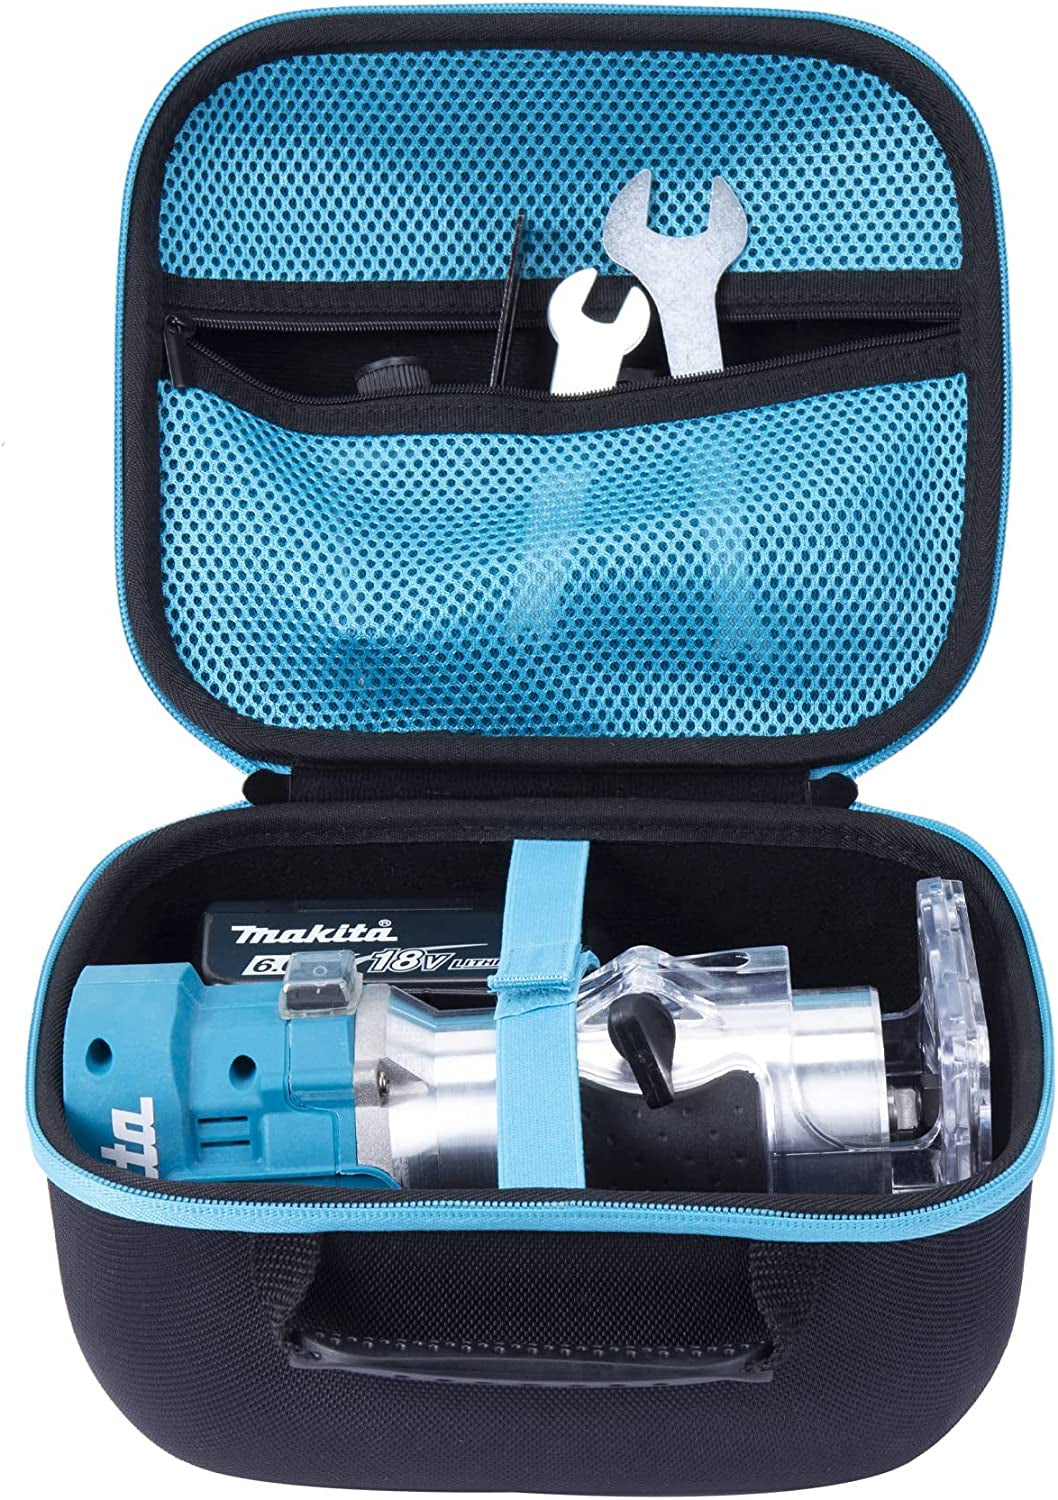 Khanka Hard Case Replacement for Makita XTR01Z 18V LXT Lithium-Ion Brushless Cordless Compact Router, Case Only